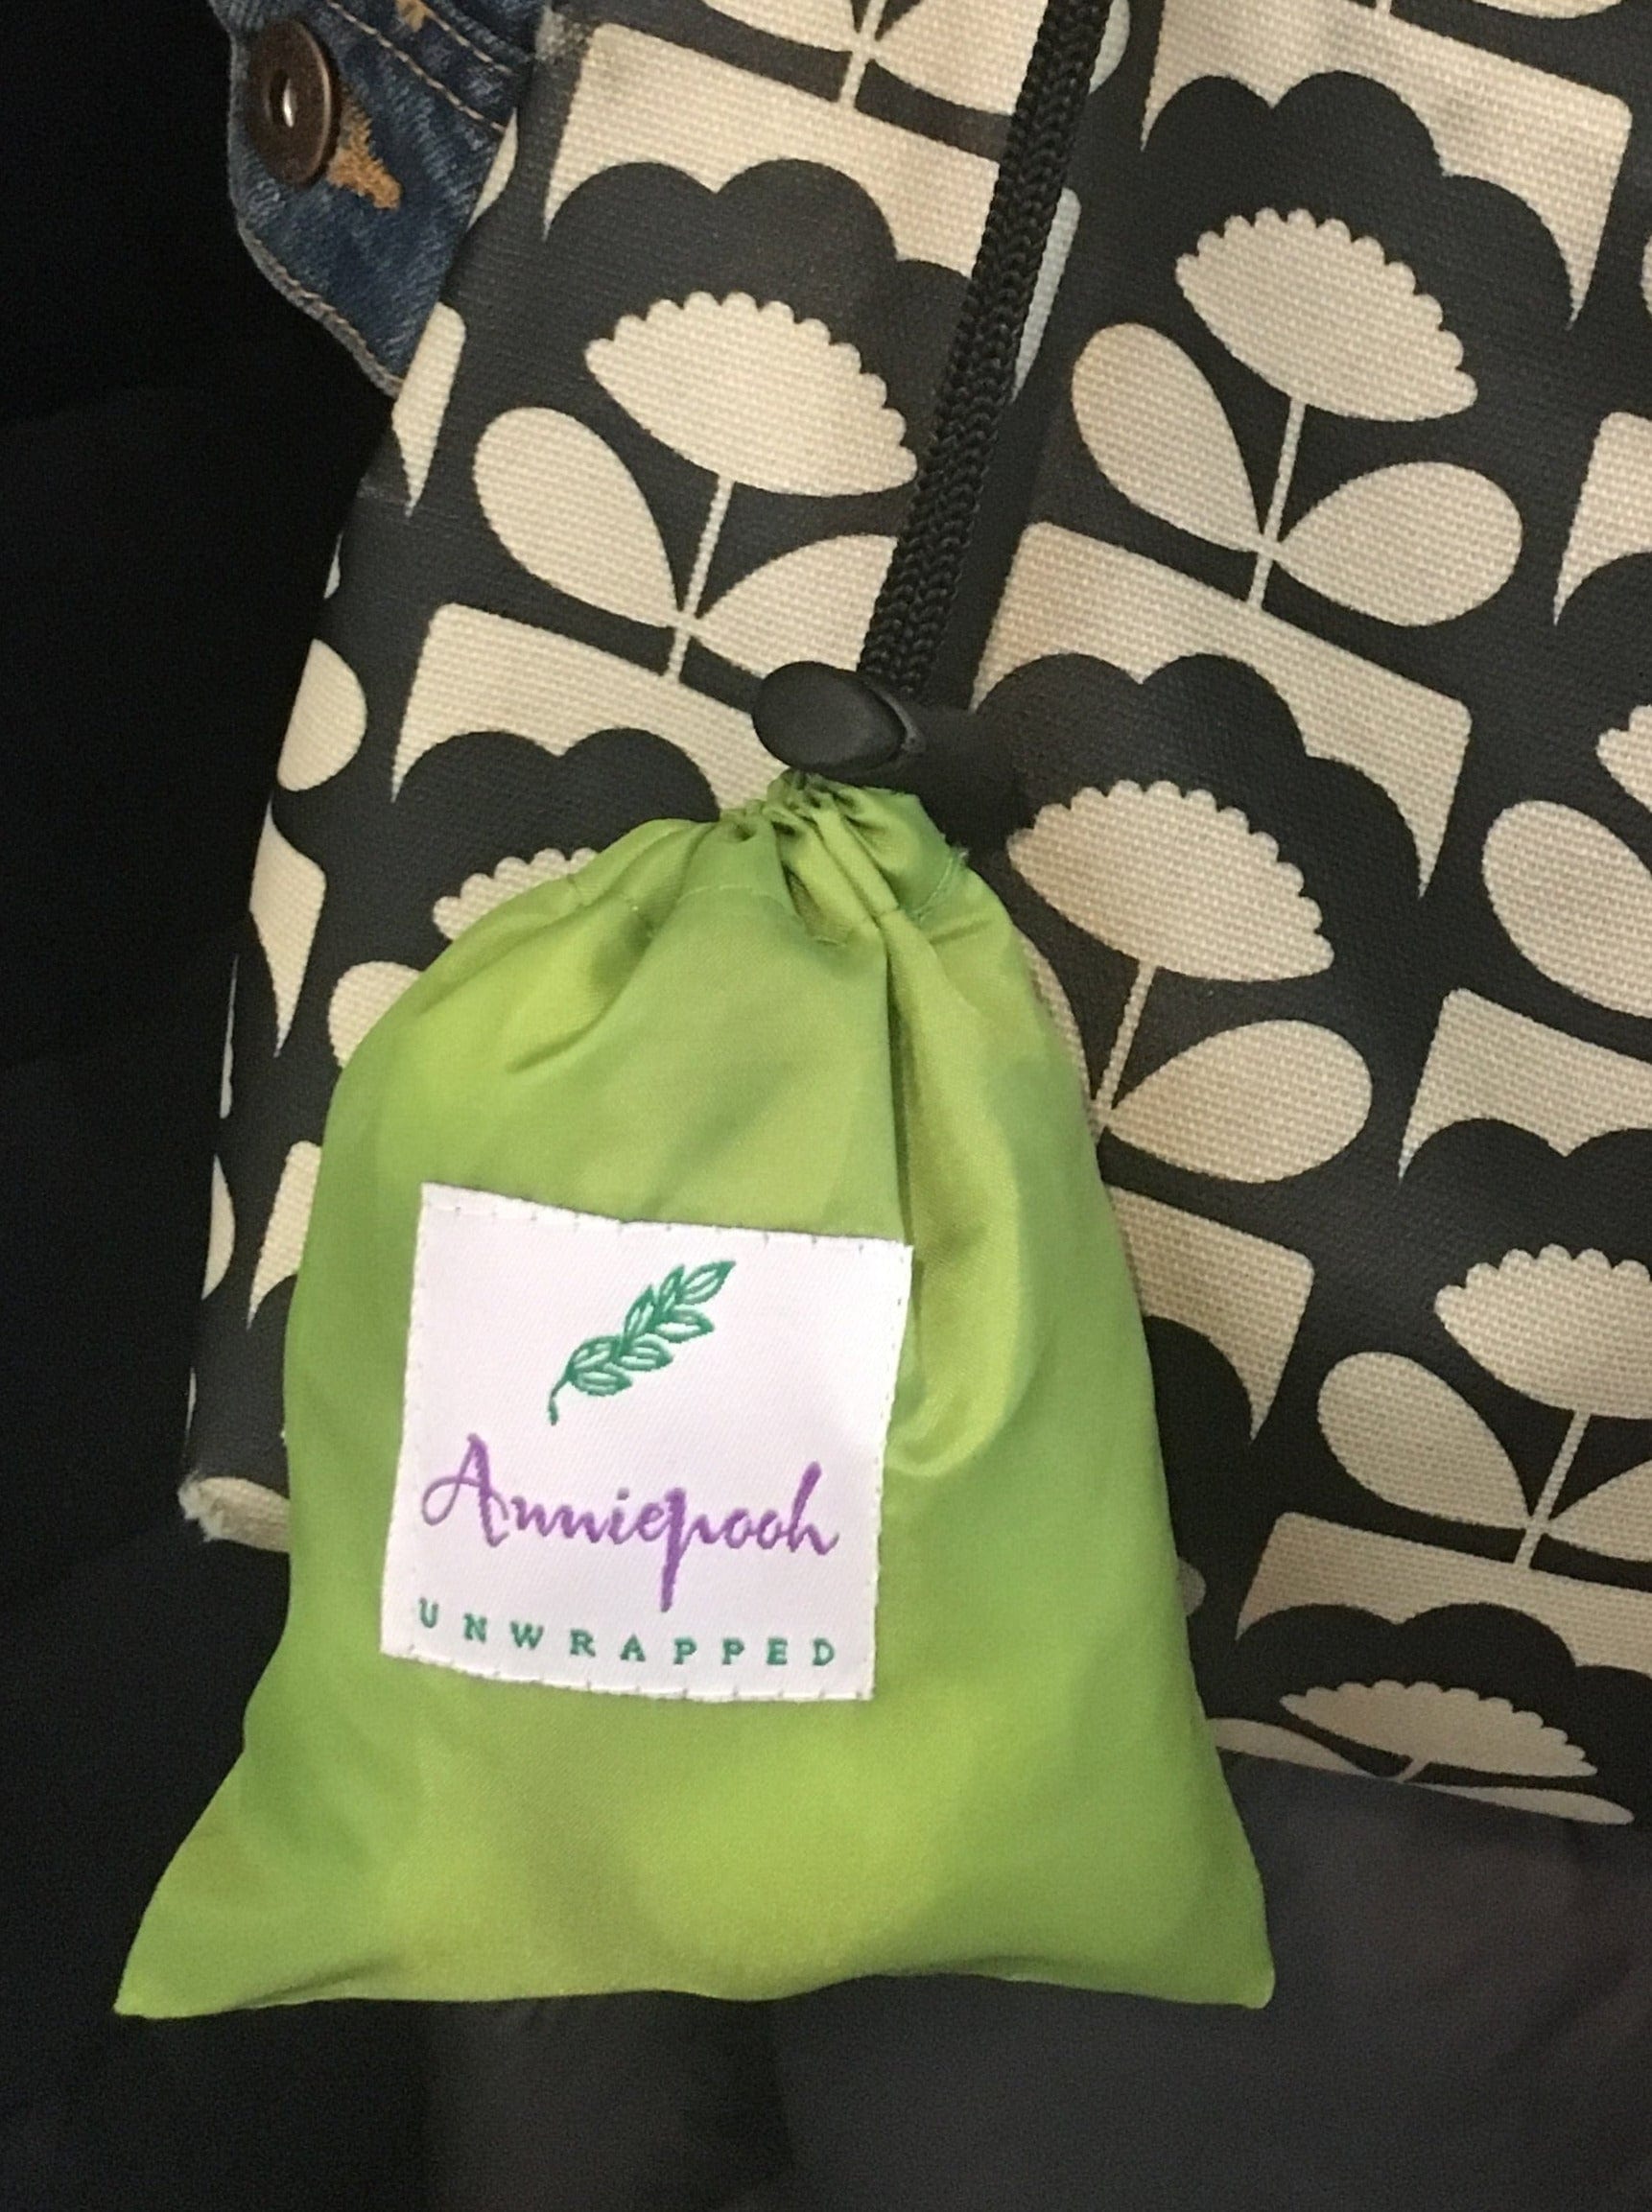 Anniepooh Green Reusable Produce Bags 5 pack